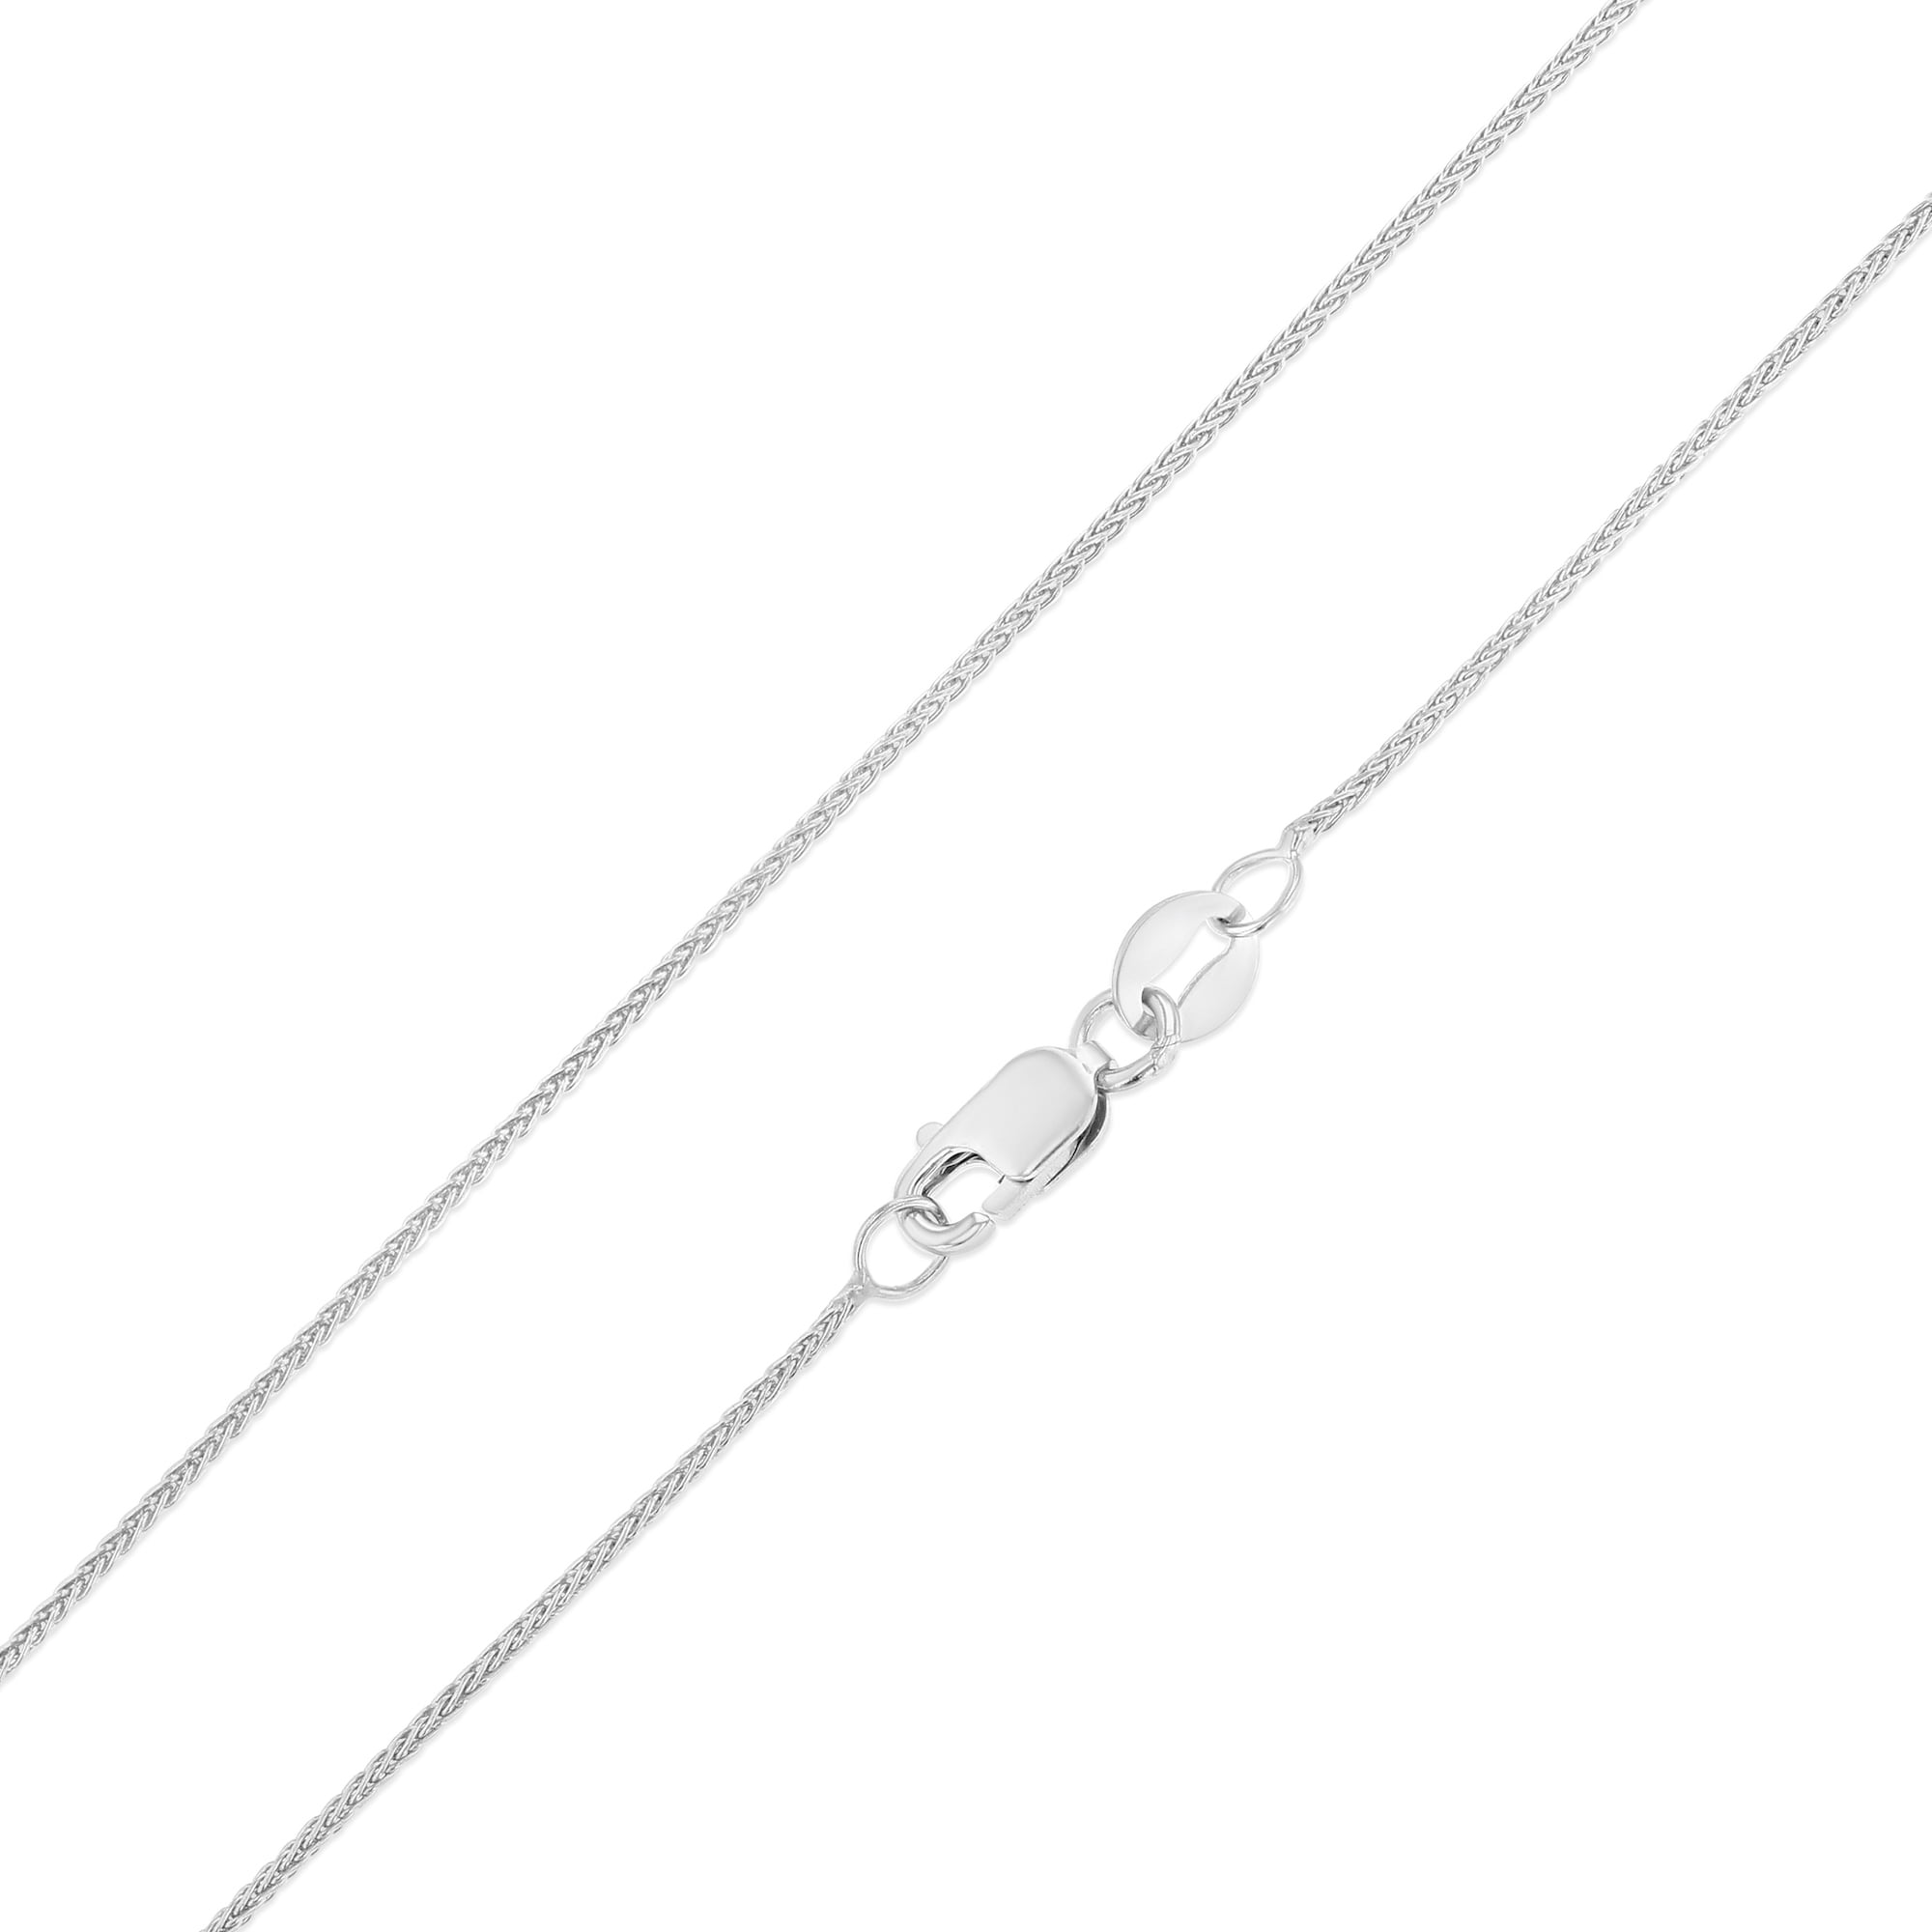 0.9mm 14k Gold Diamond-Cut Wheat Chain Necklace with Lobster Clasp 